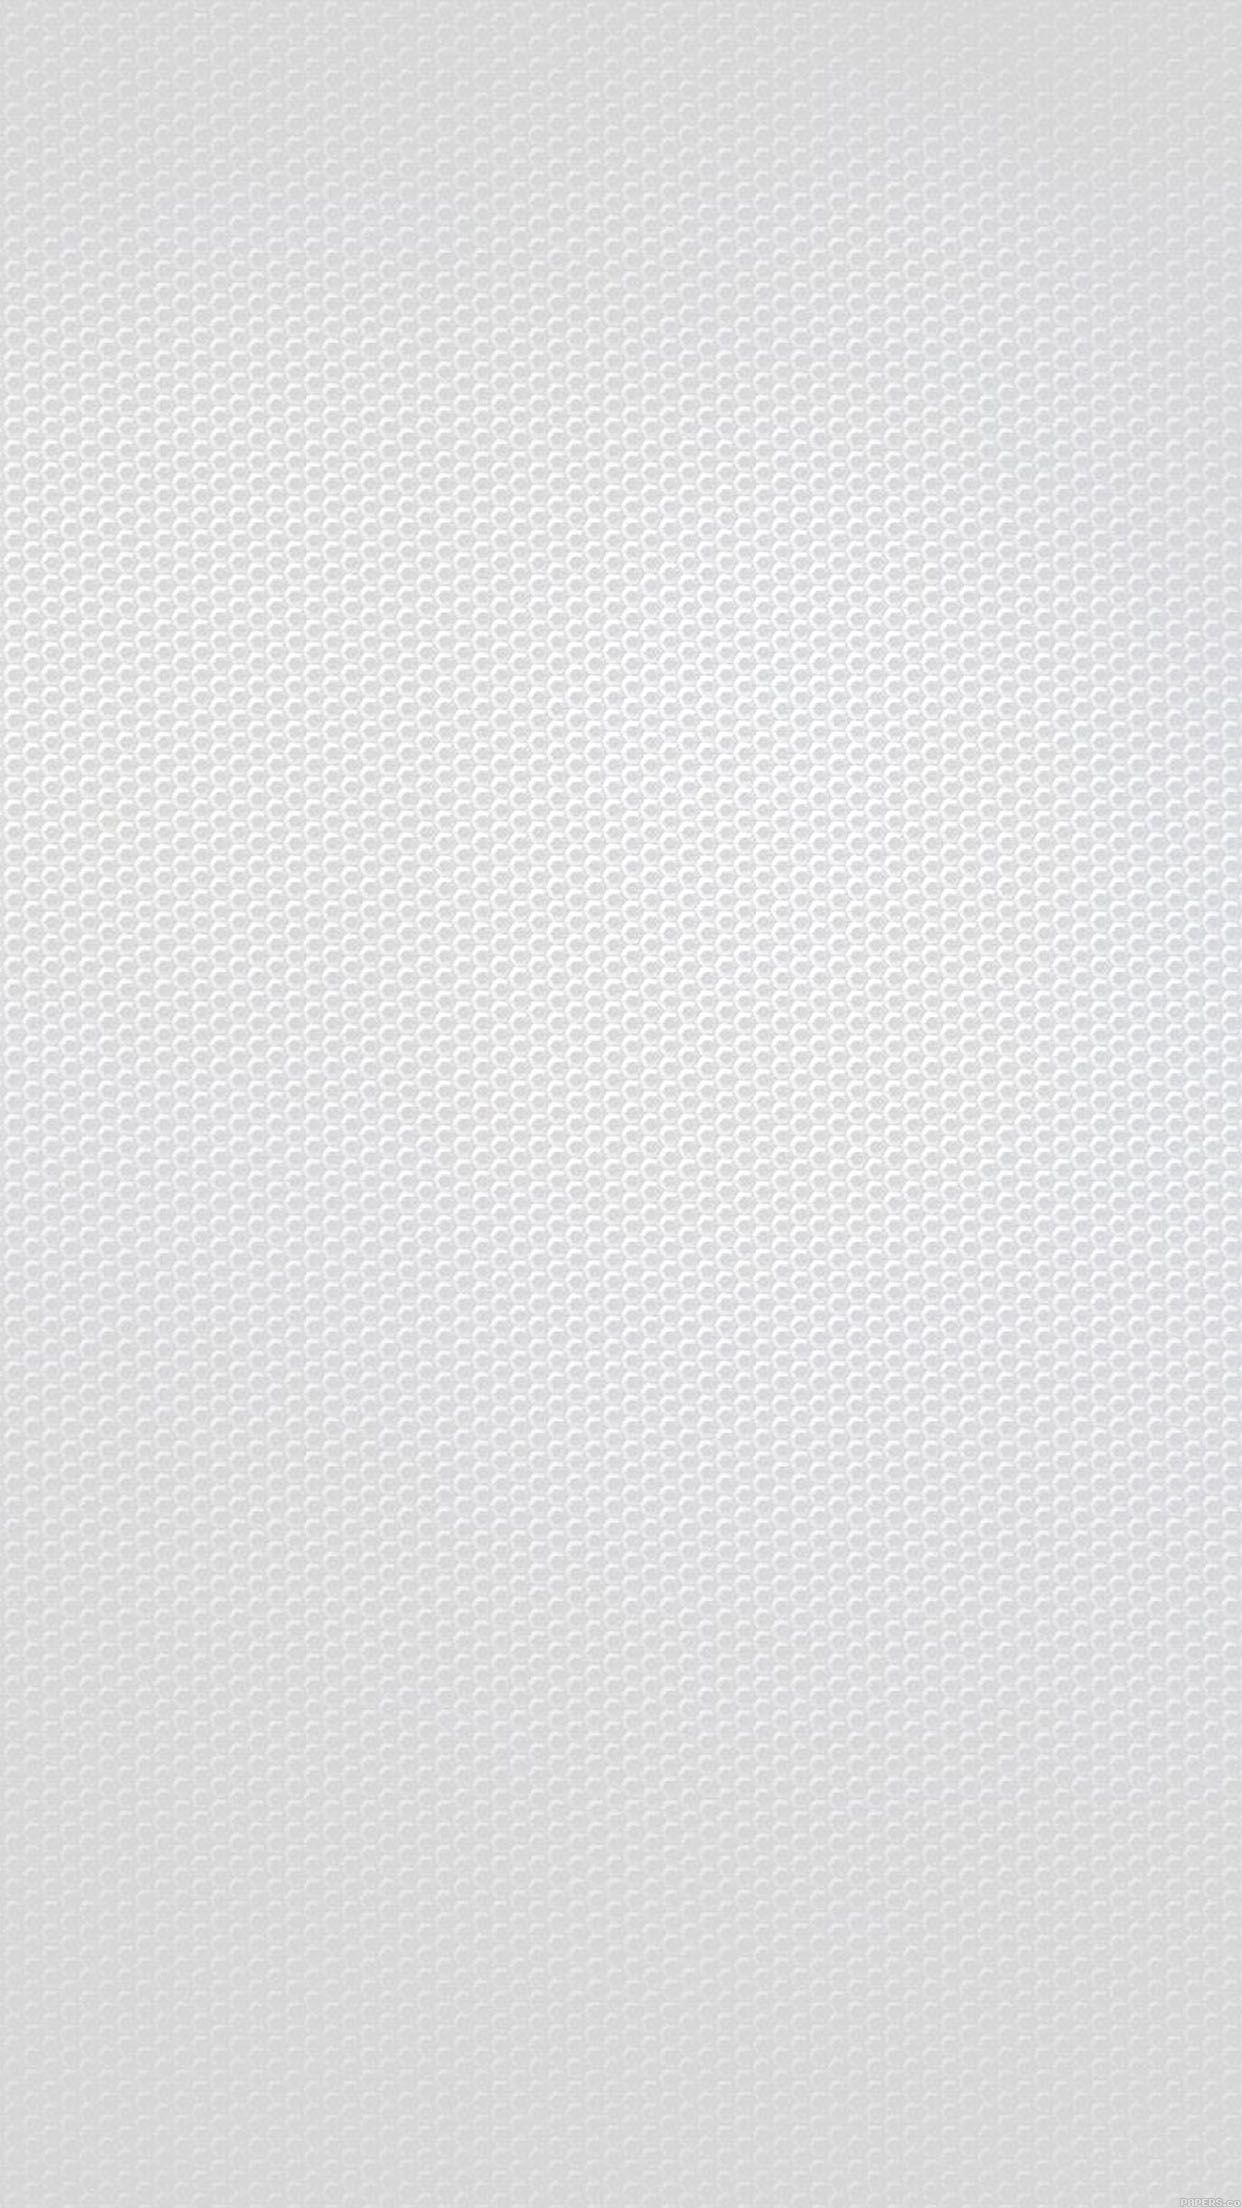 White Textured Wallpapers